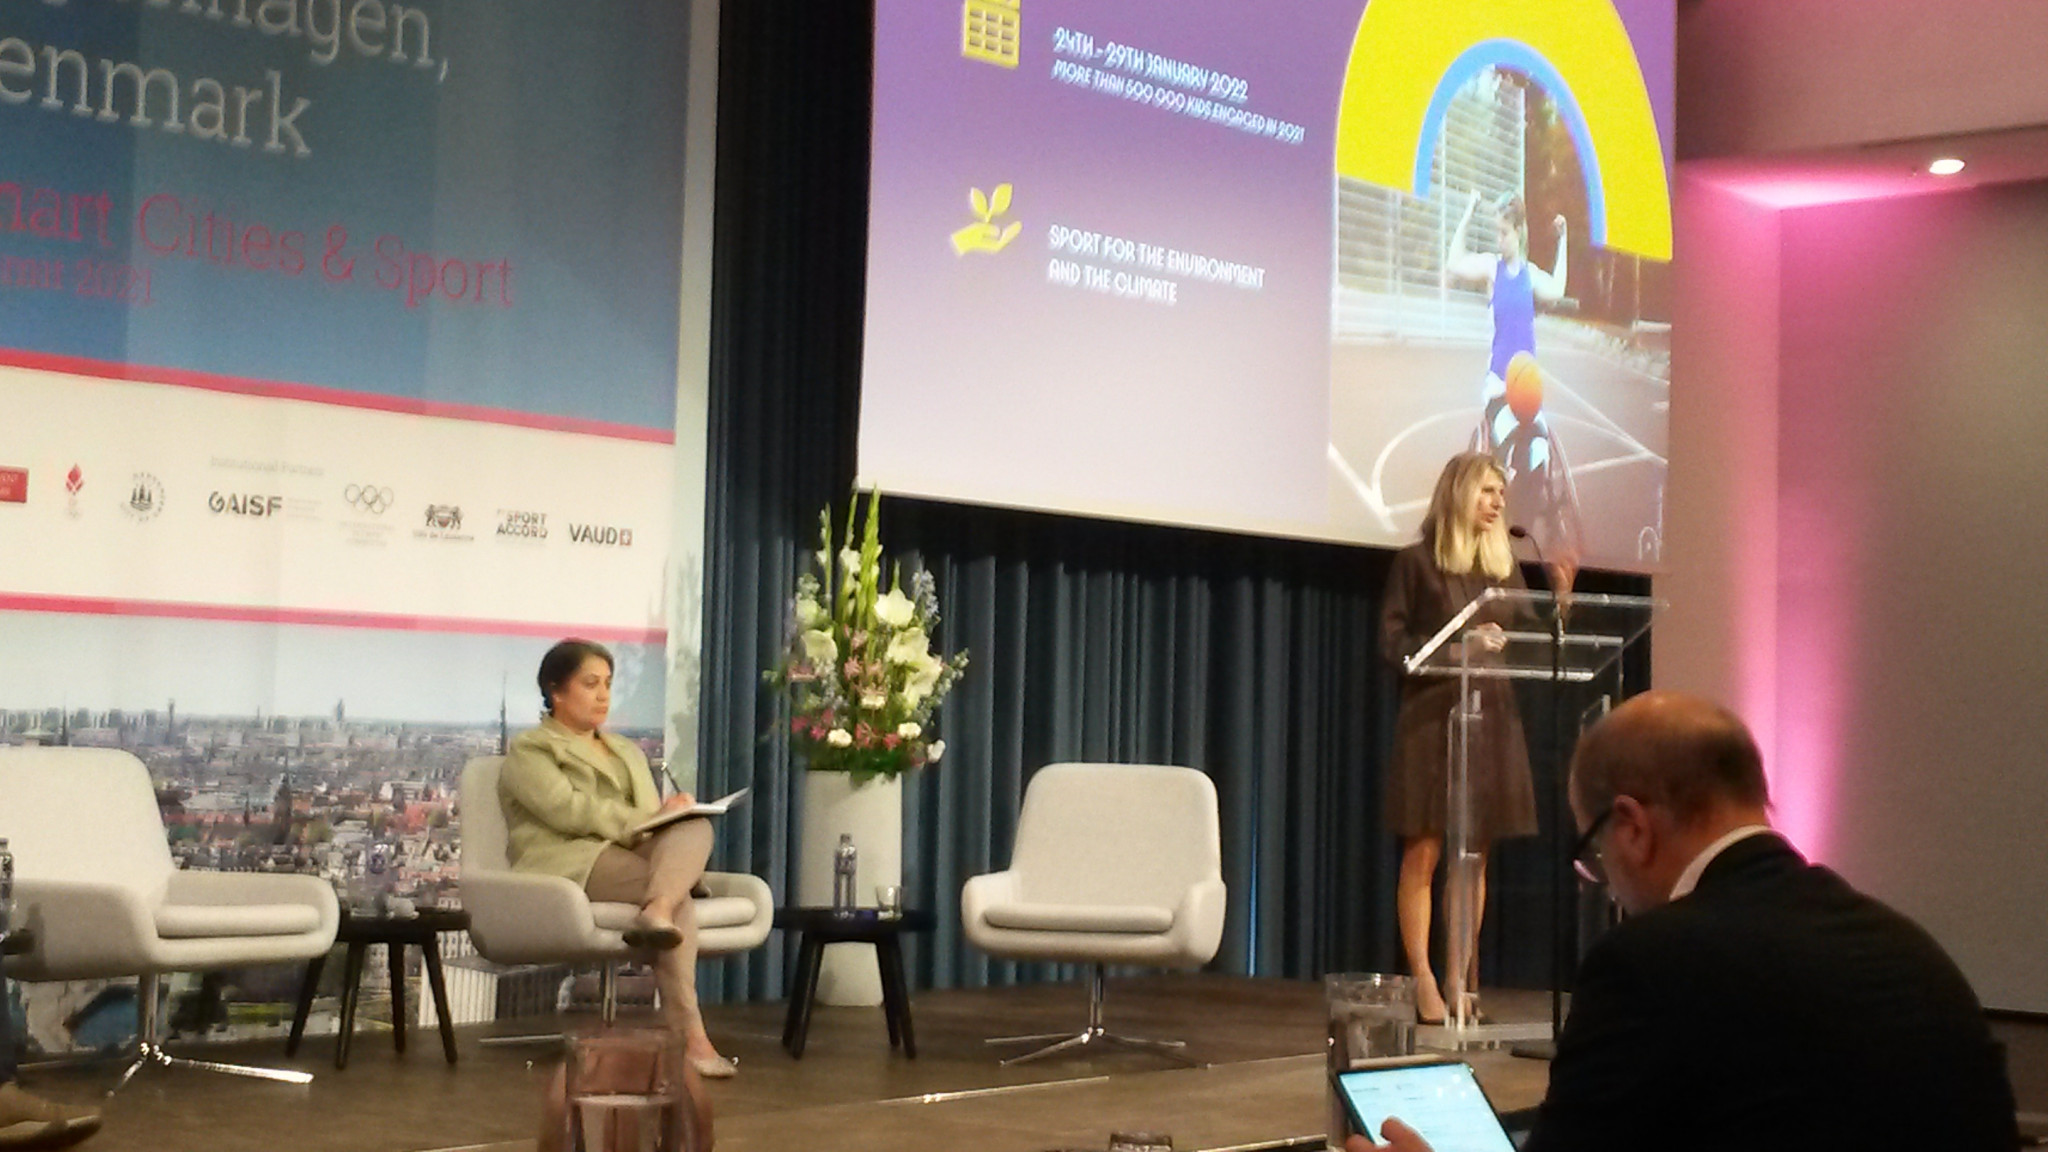 Marie Barsacq, Executive Director of Impact & Legacy for Paris 2024, addresses the Smart Cities & Sport Summit 2021 in Copenhagen today ©ITG